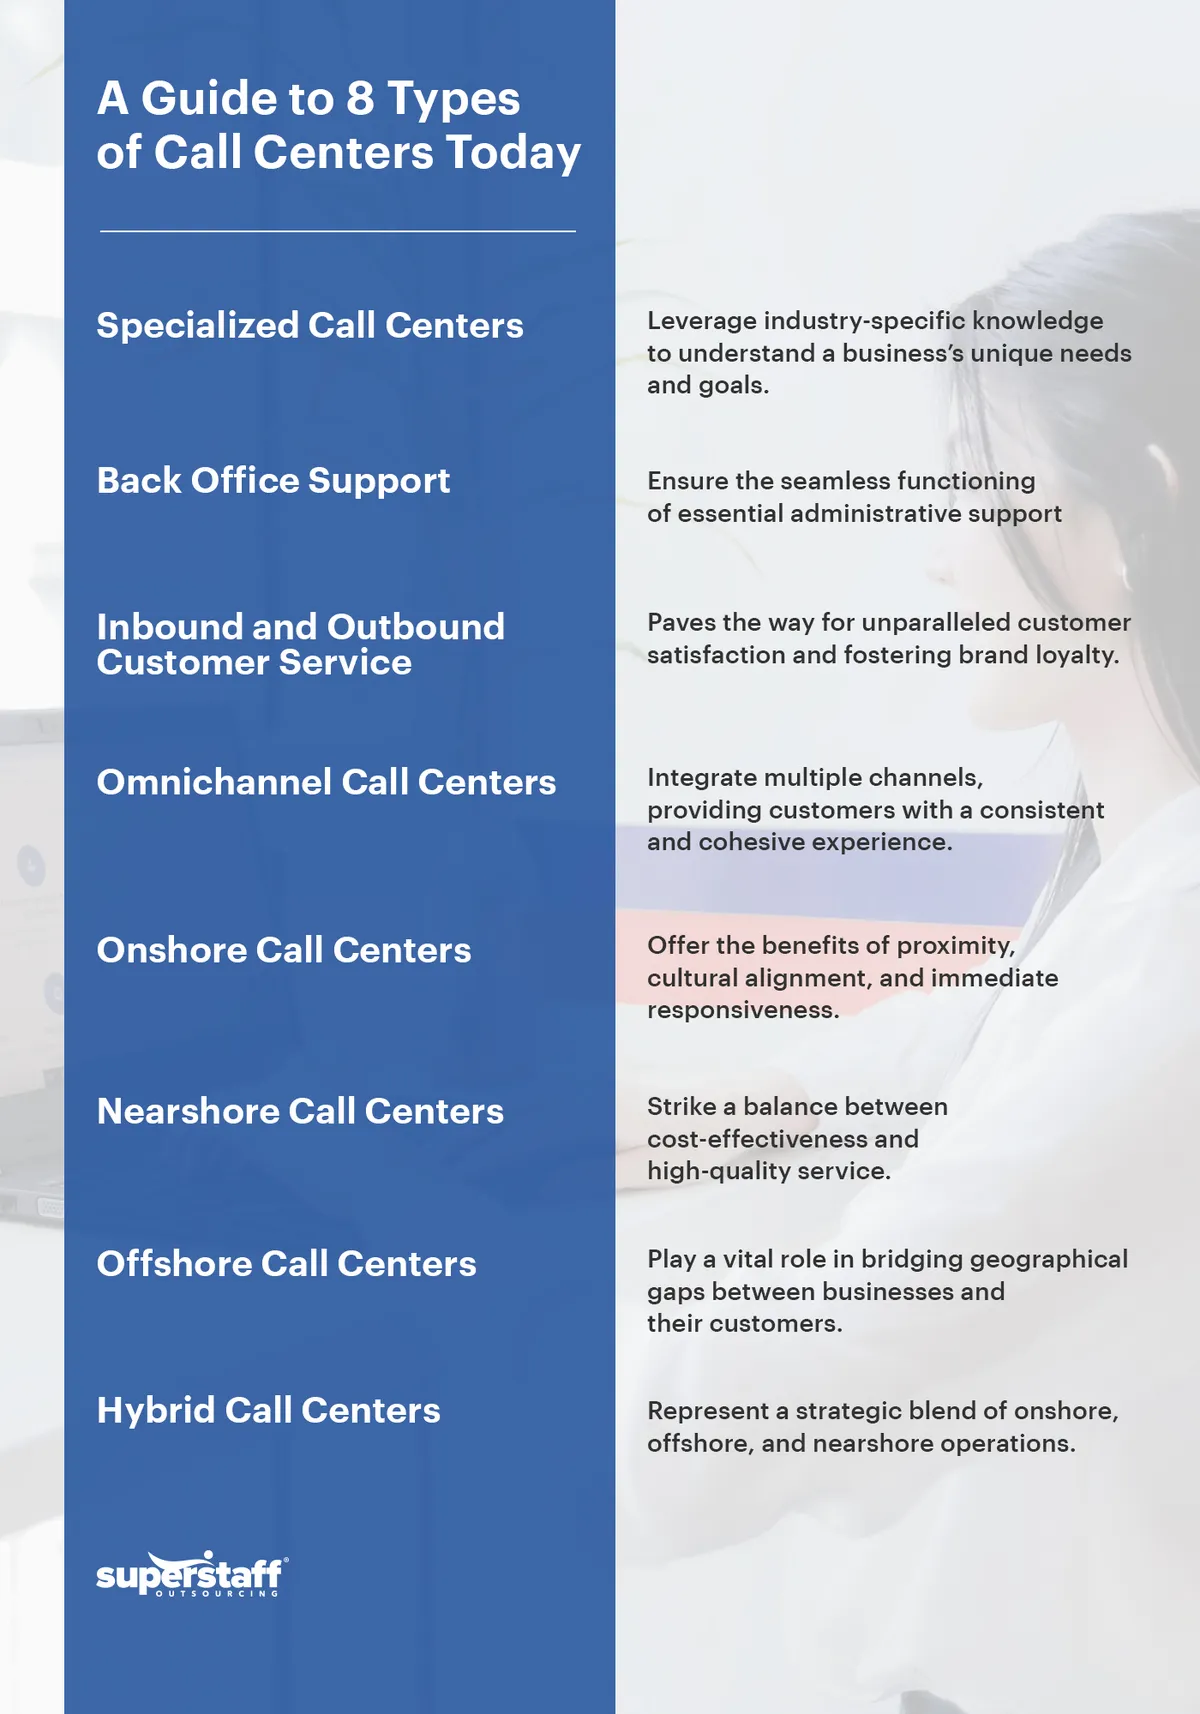 An infographic showing the 8 types of call centers today.